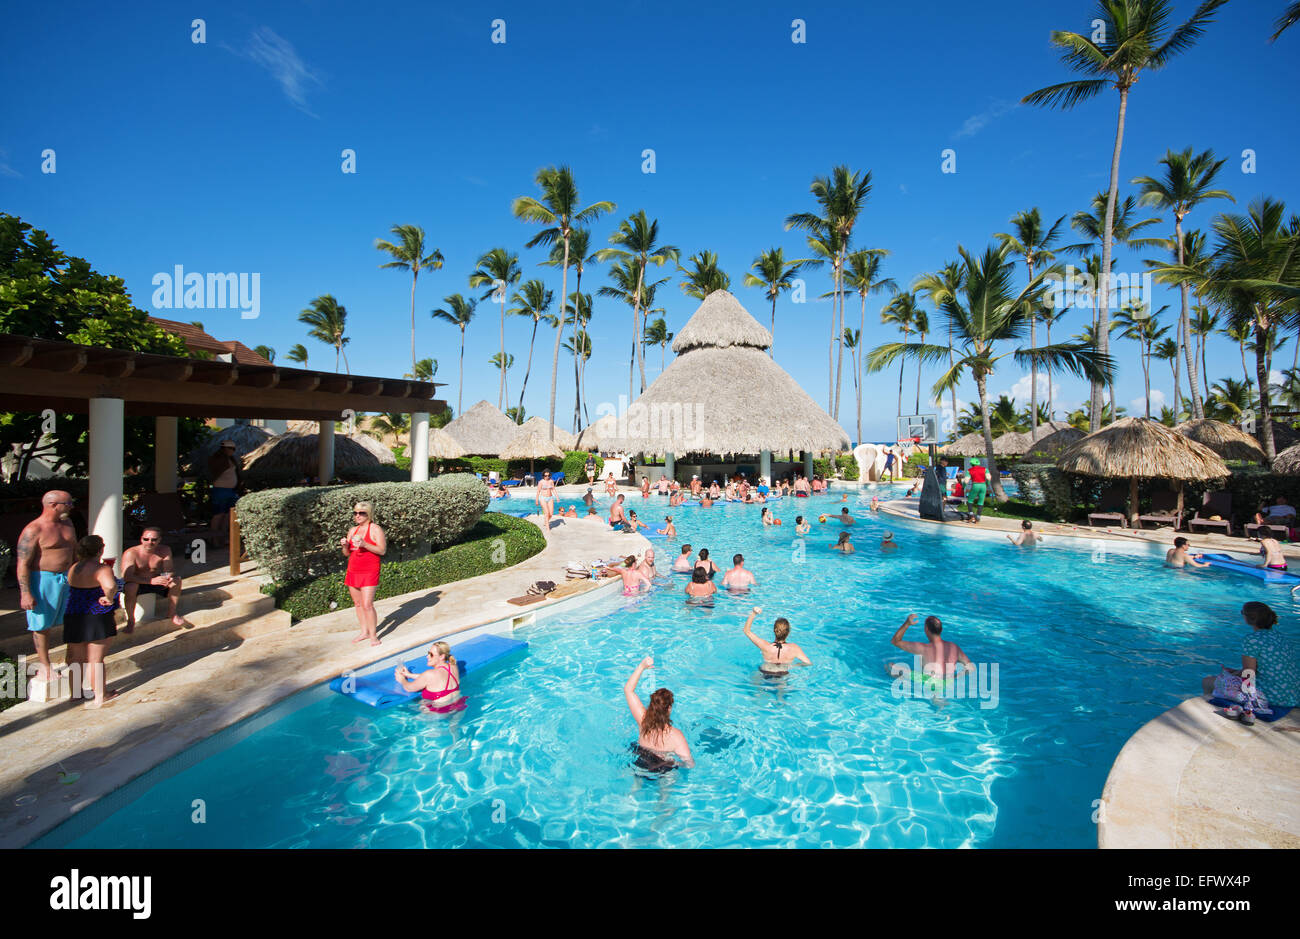 DOMINICAN REPUBLIC. A swimming pool and swim-up bar at a luxury beach resort. Stock Photo